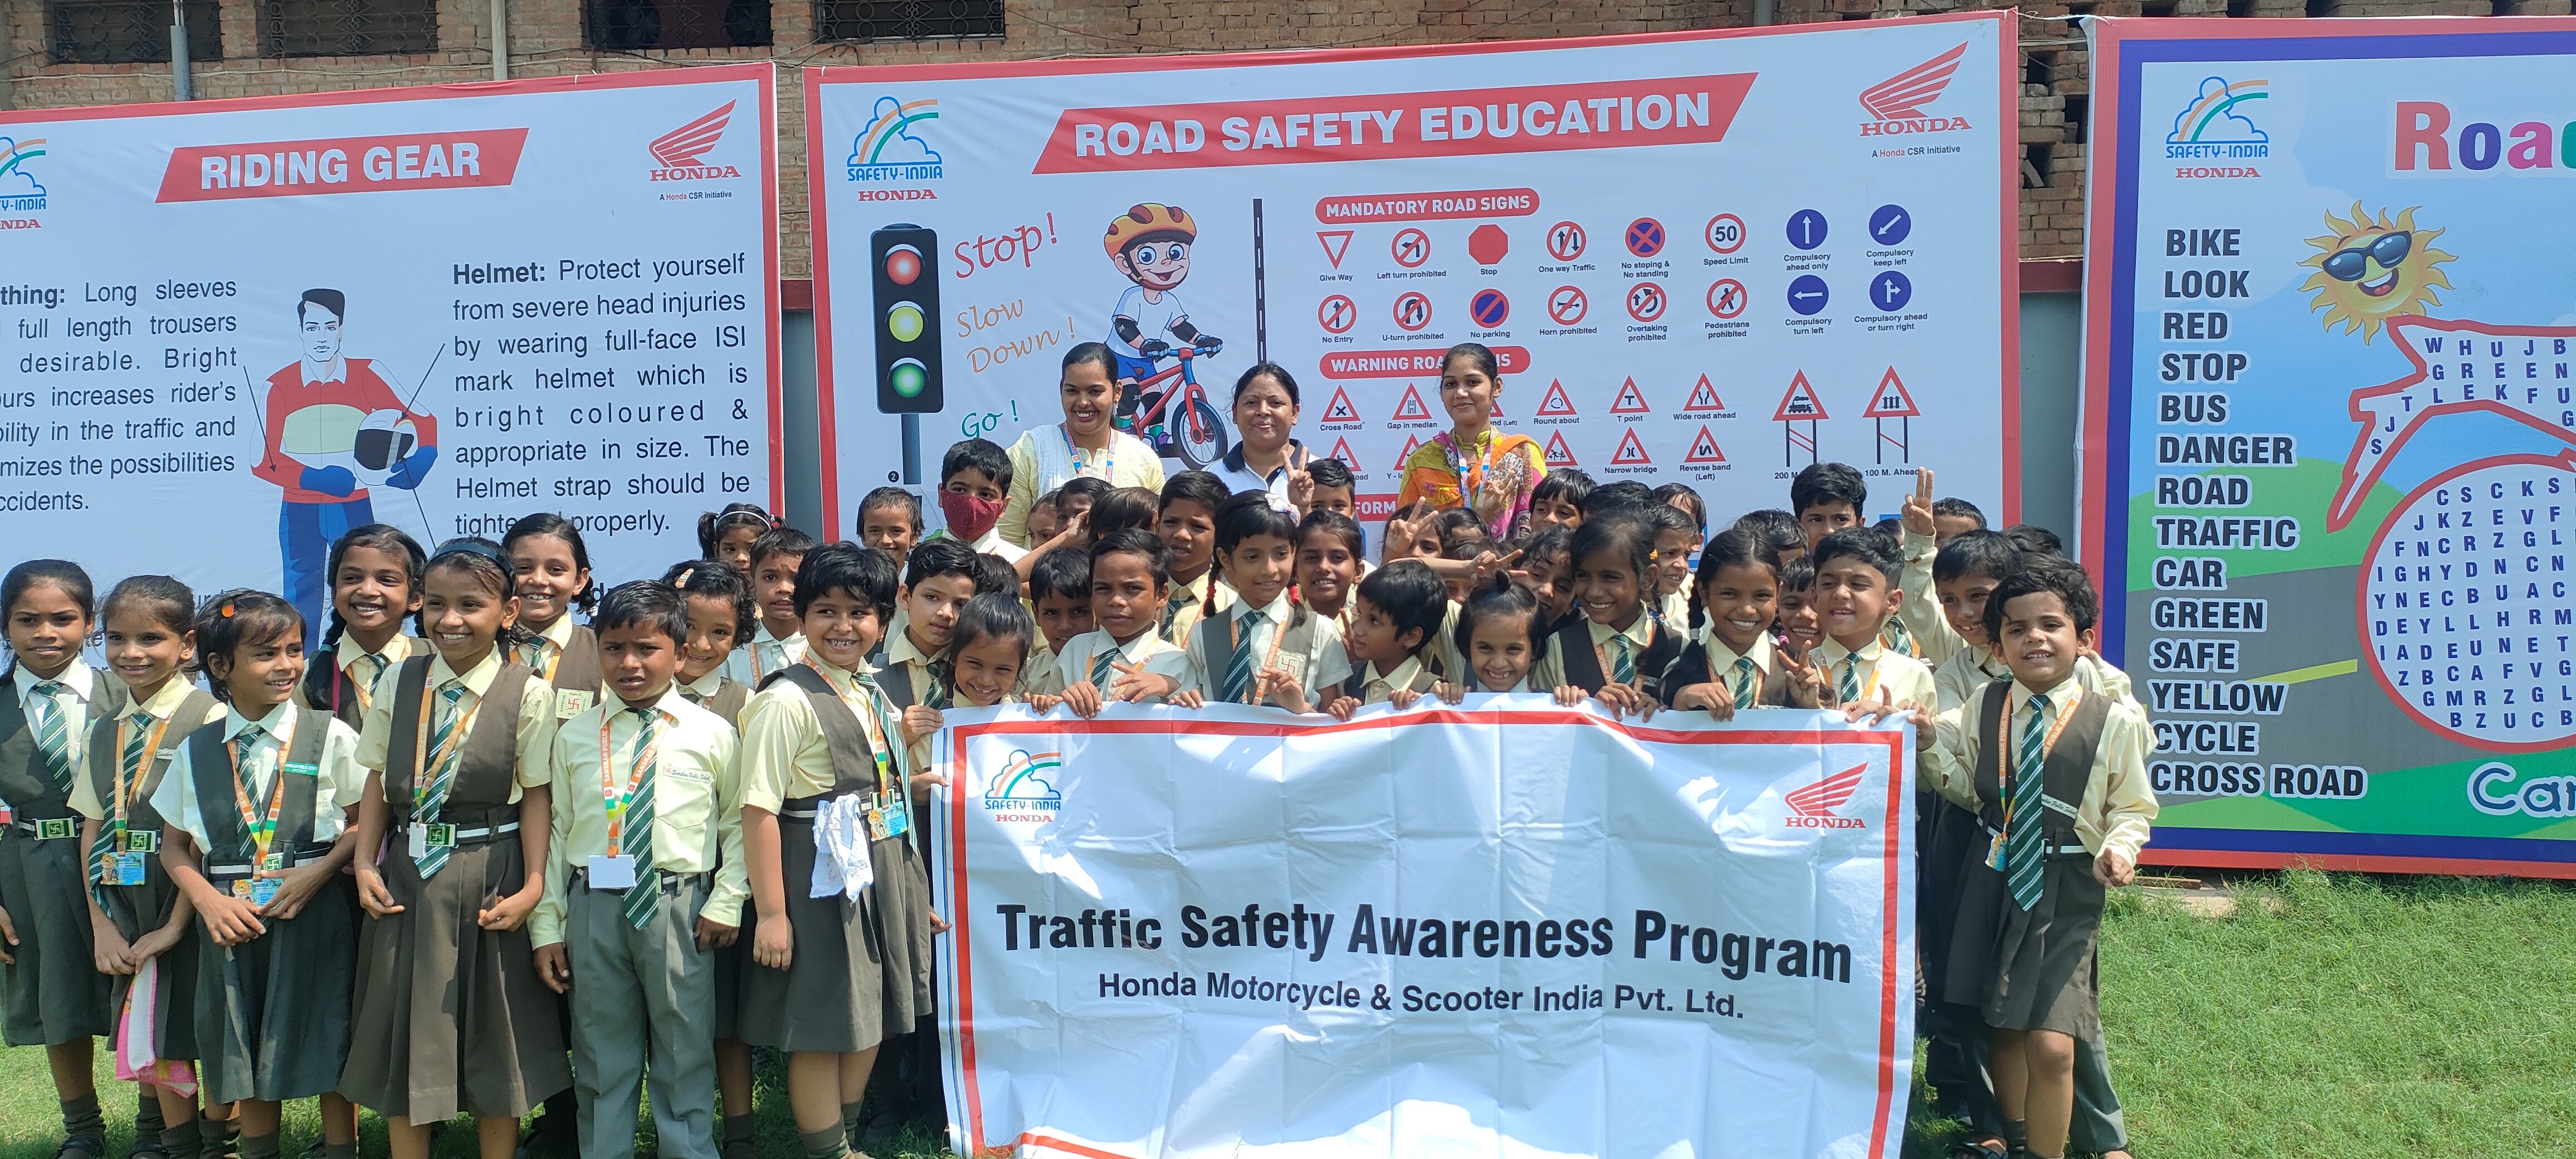 Honda Motorcycle & Scooter India conducts  Road Safety Awareness Campaign in Uttar Pradesh